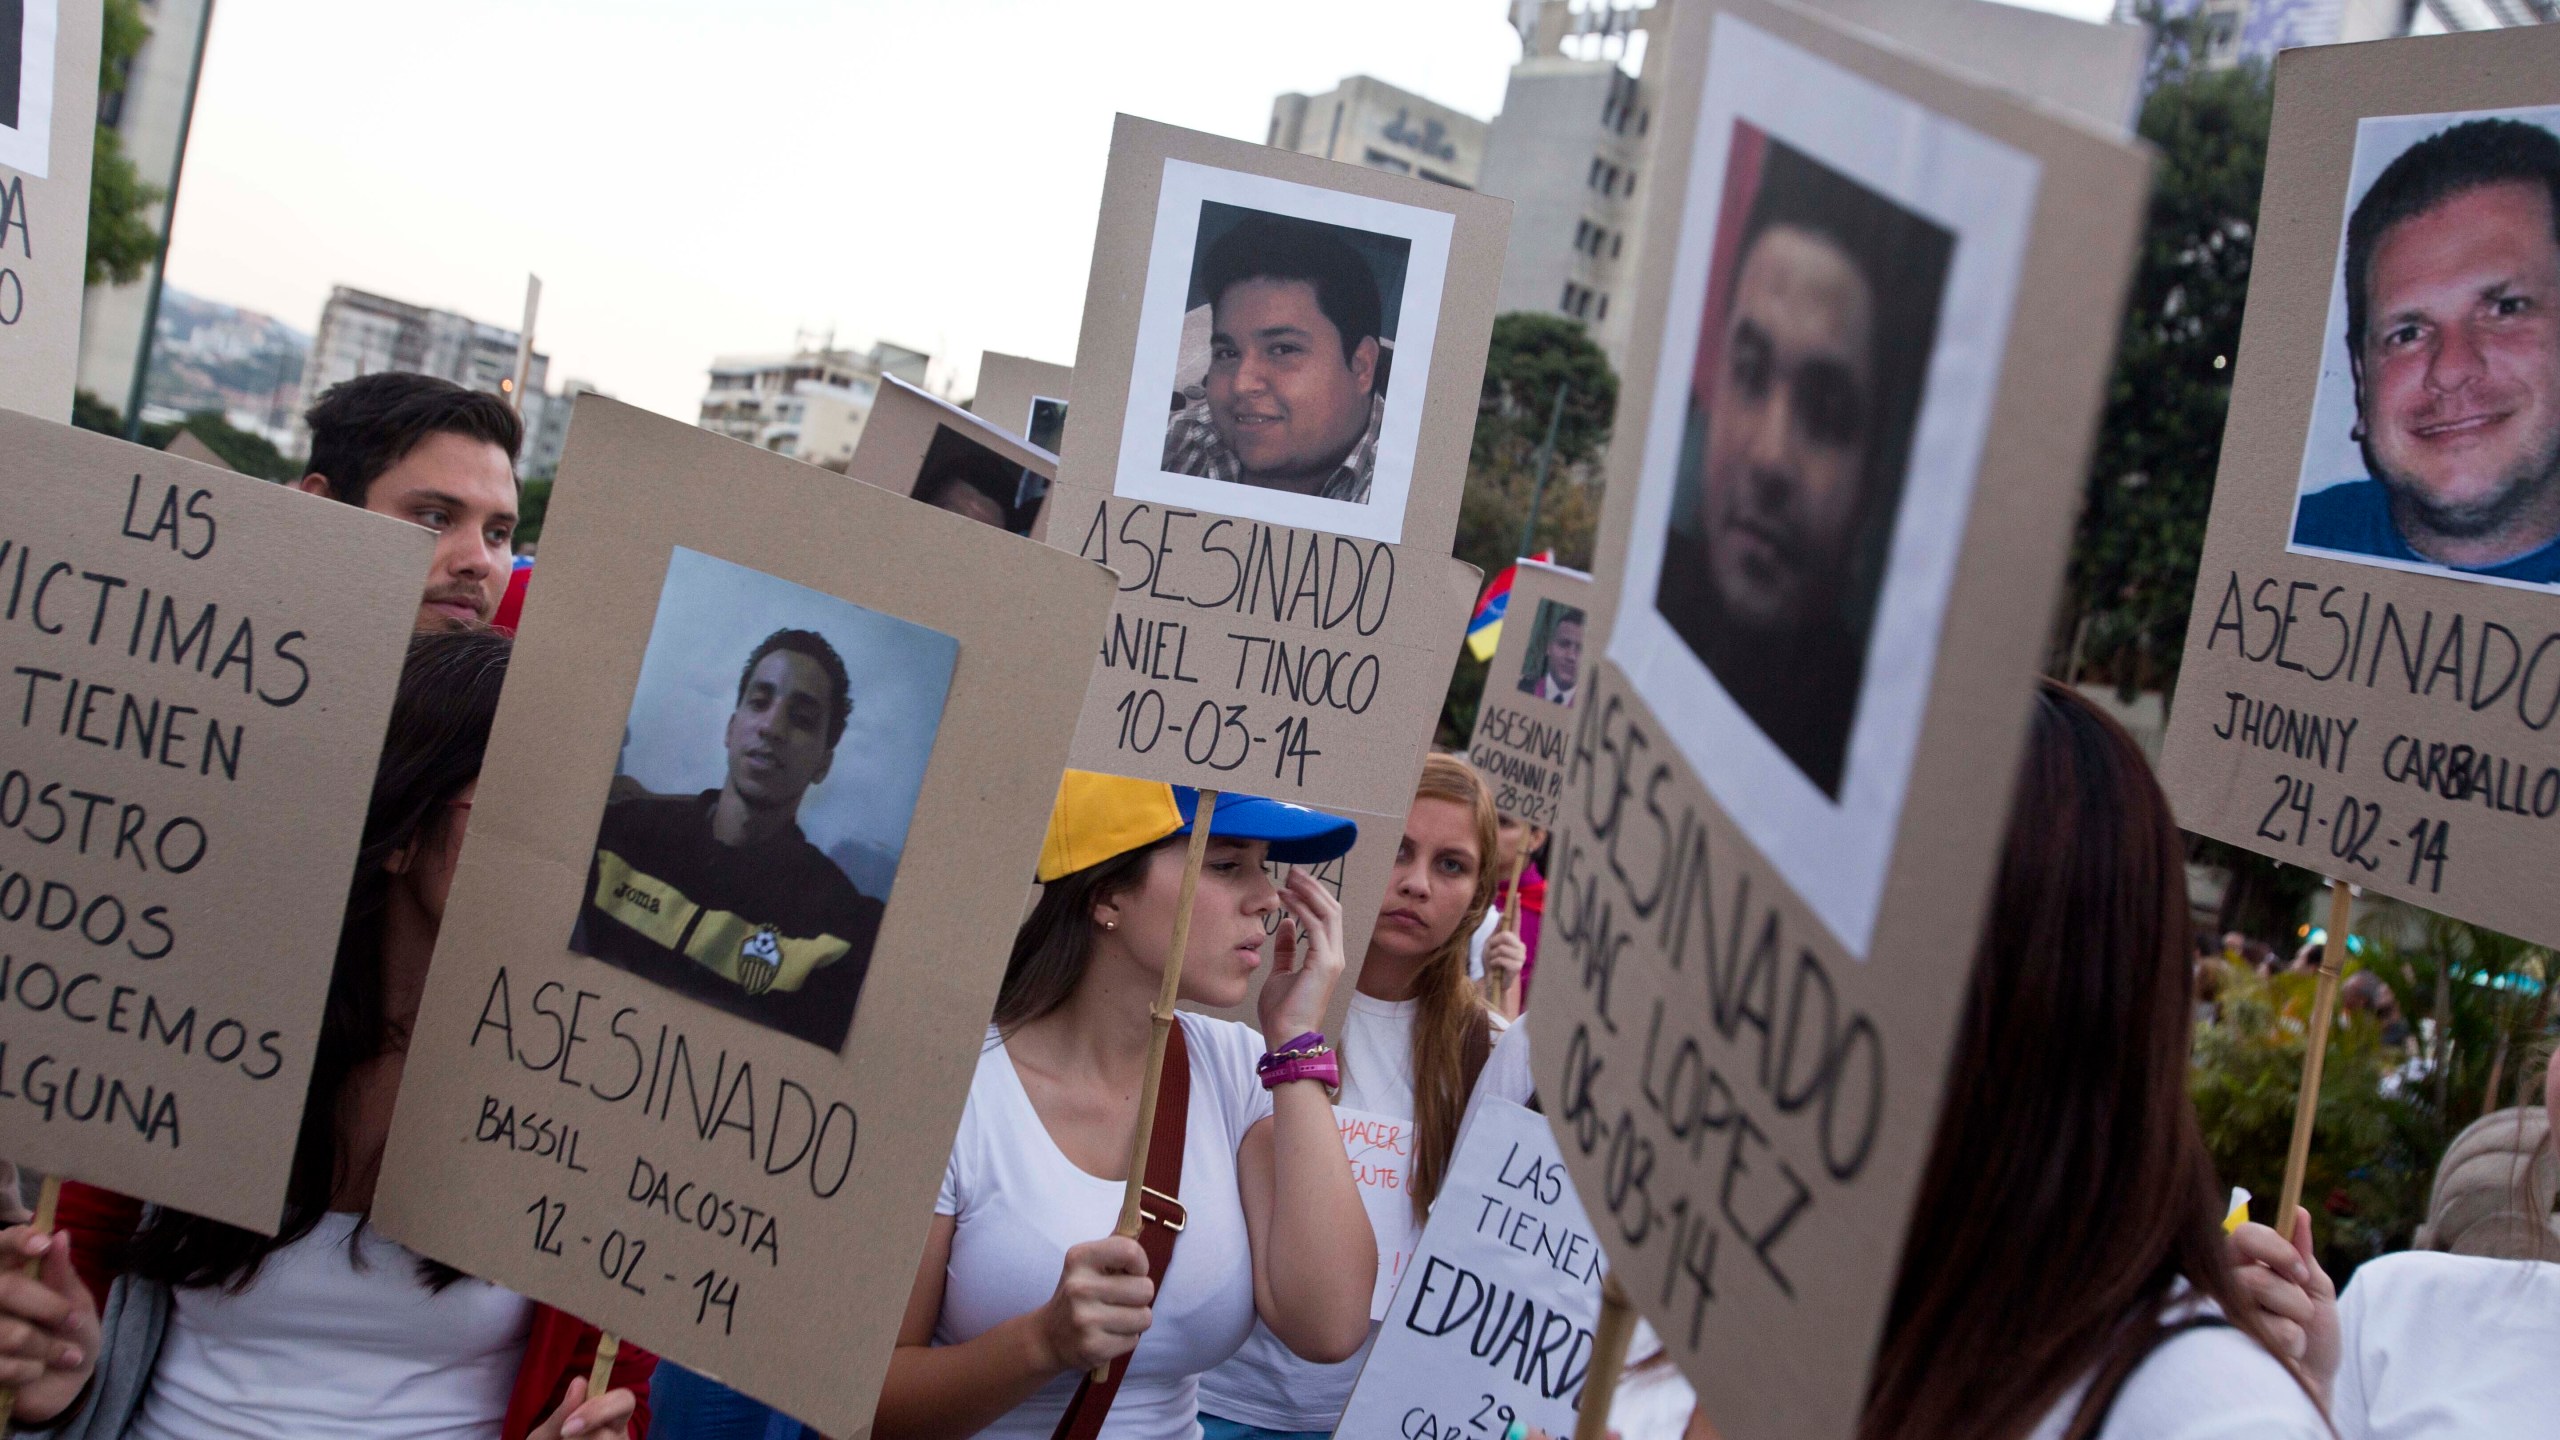 FILE - Demonstrators holds cardboard posters showing images of family and friends killed during anti-government protests, in Caracas, Venezuela, March 18, 2014. An Argentine federal court in Buenos Aires on June 28, 2024, concluded testimony from Venezuelan victims as part of an investigation into probable human rights abuses allegedly committed by security forces during the 2014 clampdown on mass anti-government protests. (AP Photo/Esteban Felix, File)